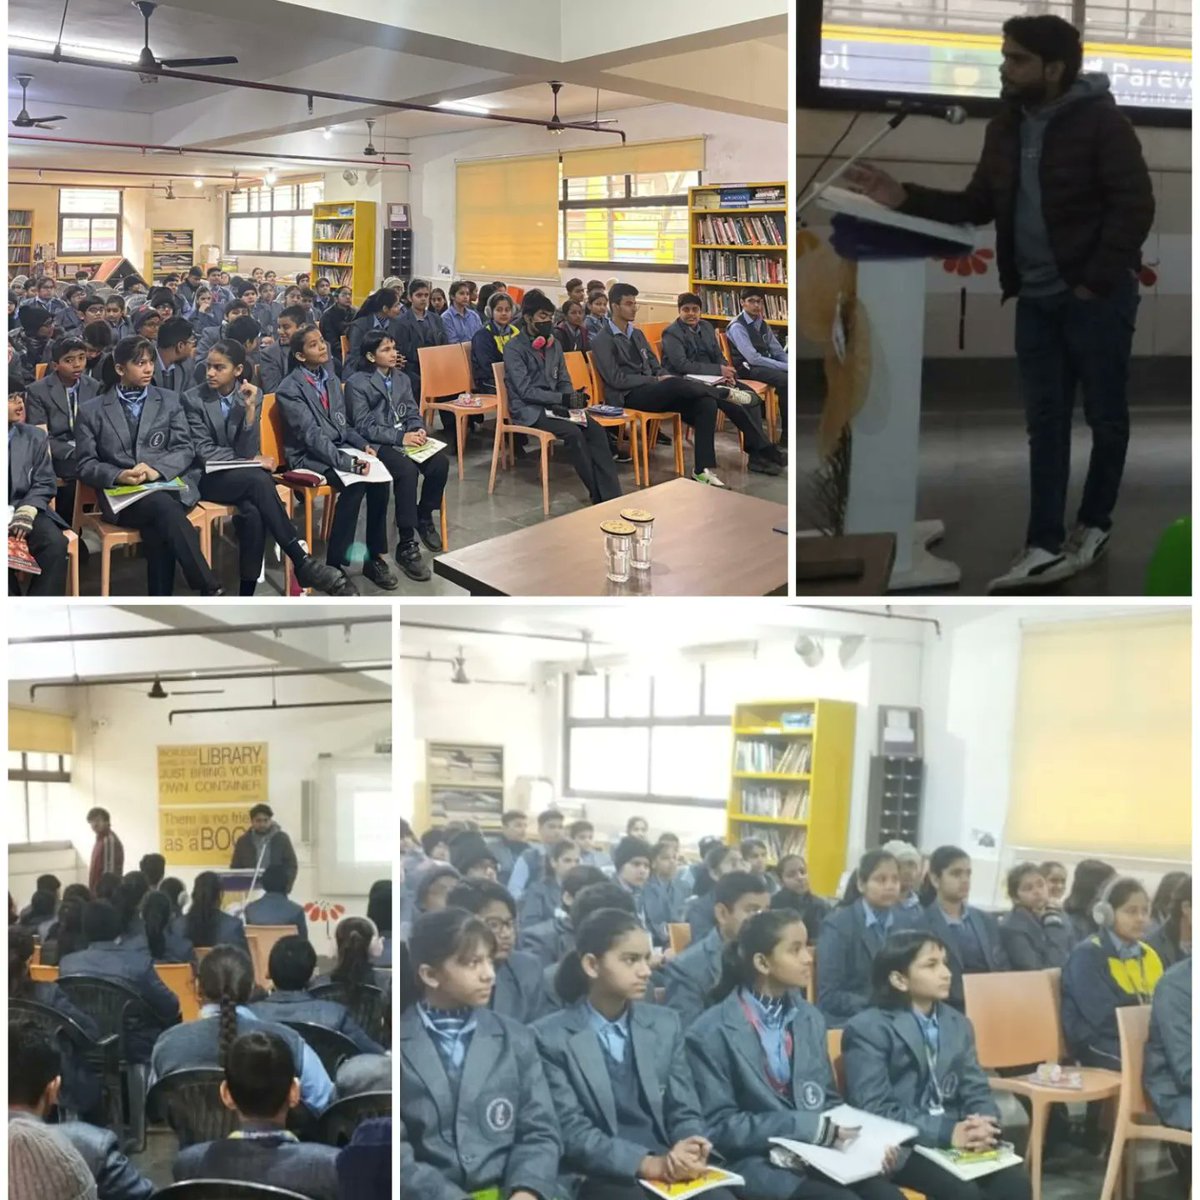 🔬✨ Empowering young minds at Parevartan School, Ghaziabad! Team Interstellars hosted a STEM ENGAGEMENT WORKSHOP, igniting curiosity and sparking the flames of innovation. 🚀#STEMWorkshop #TeamInterstellars #InspiringInnovation #STEMEngagement #TeamInterstellars #Innovation